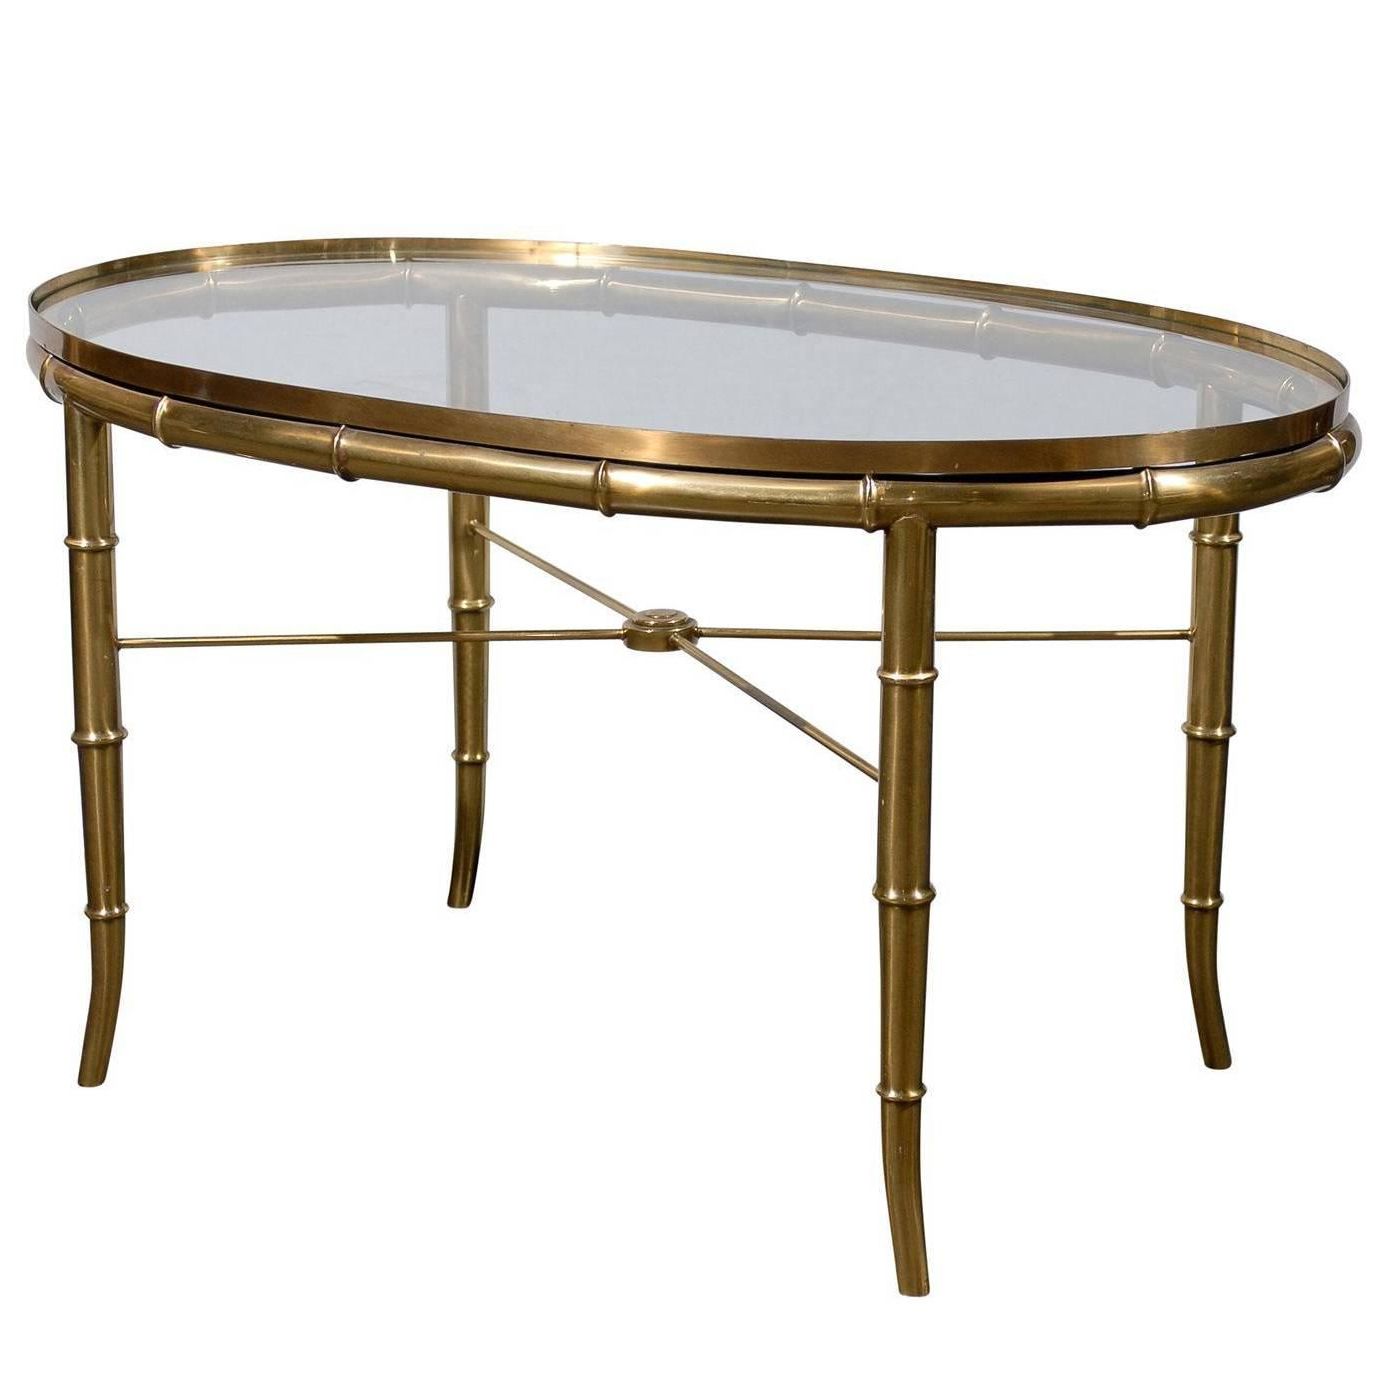 Oval Brass Glass Top Cocktail Or Coffee Table At 1stdibs In Fashionable Glass And Gold Oval Coffee Tables (View 11 of 20)